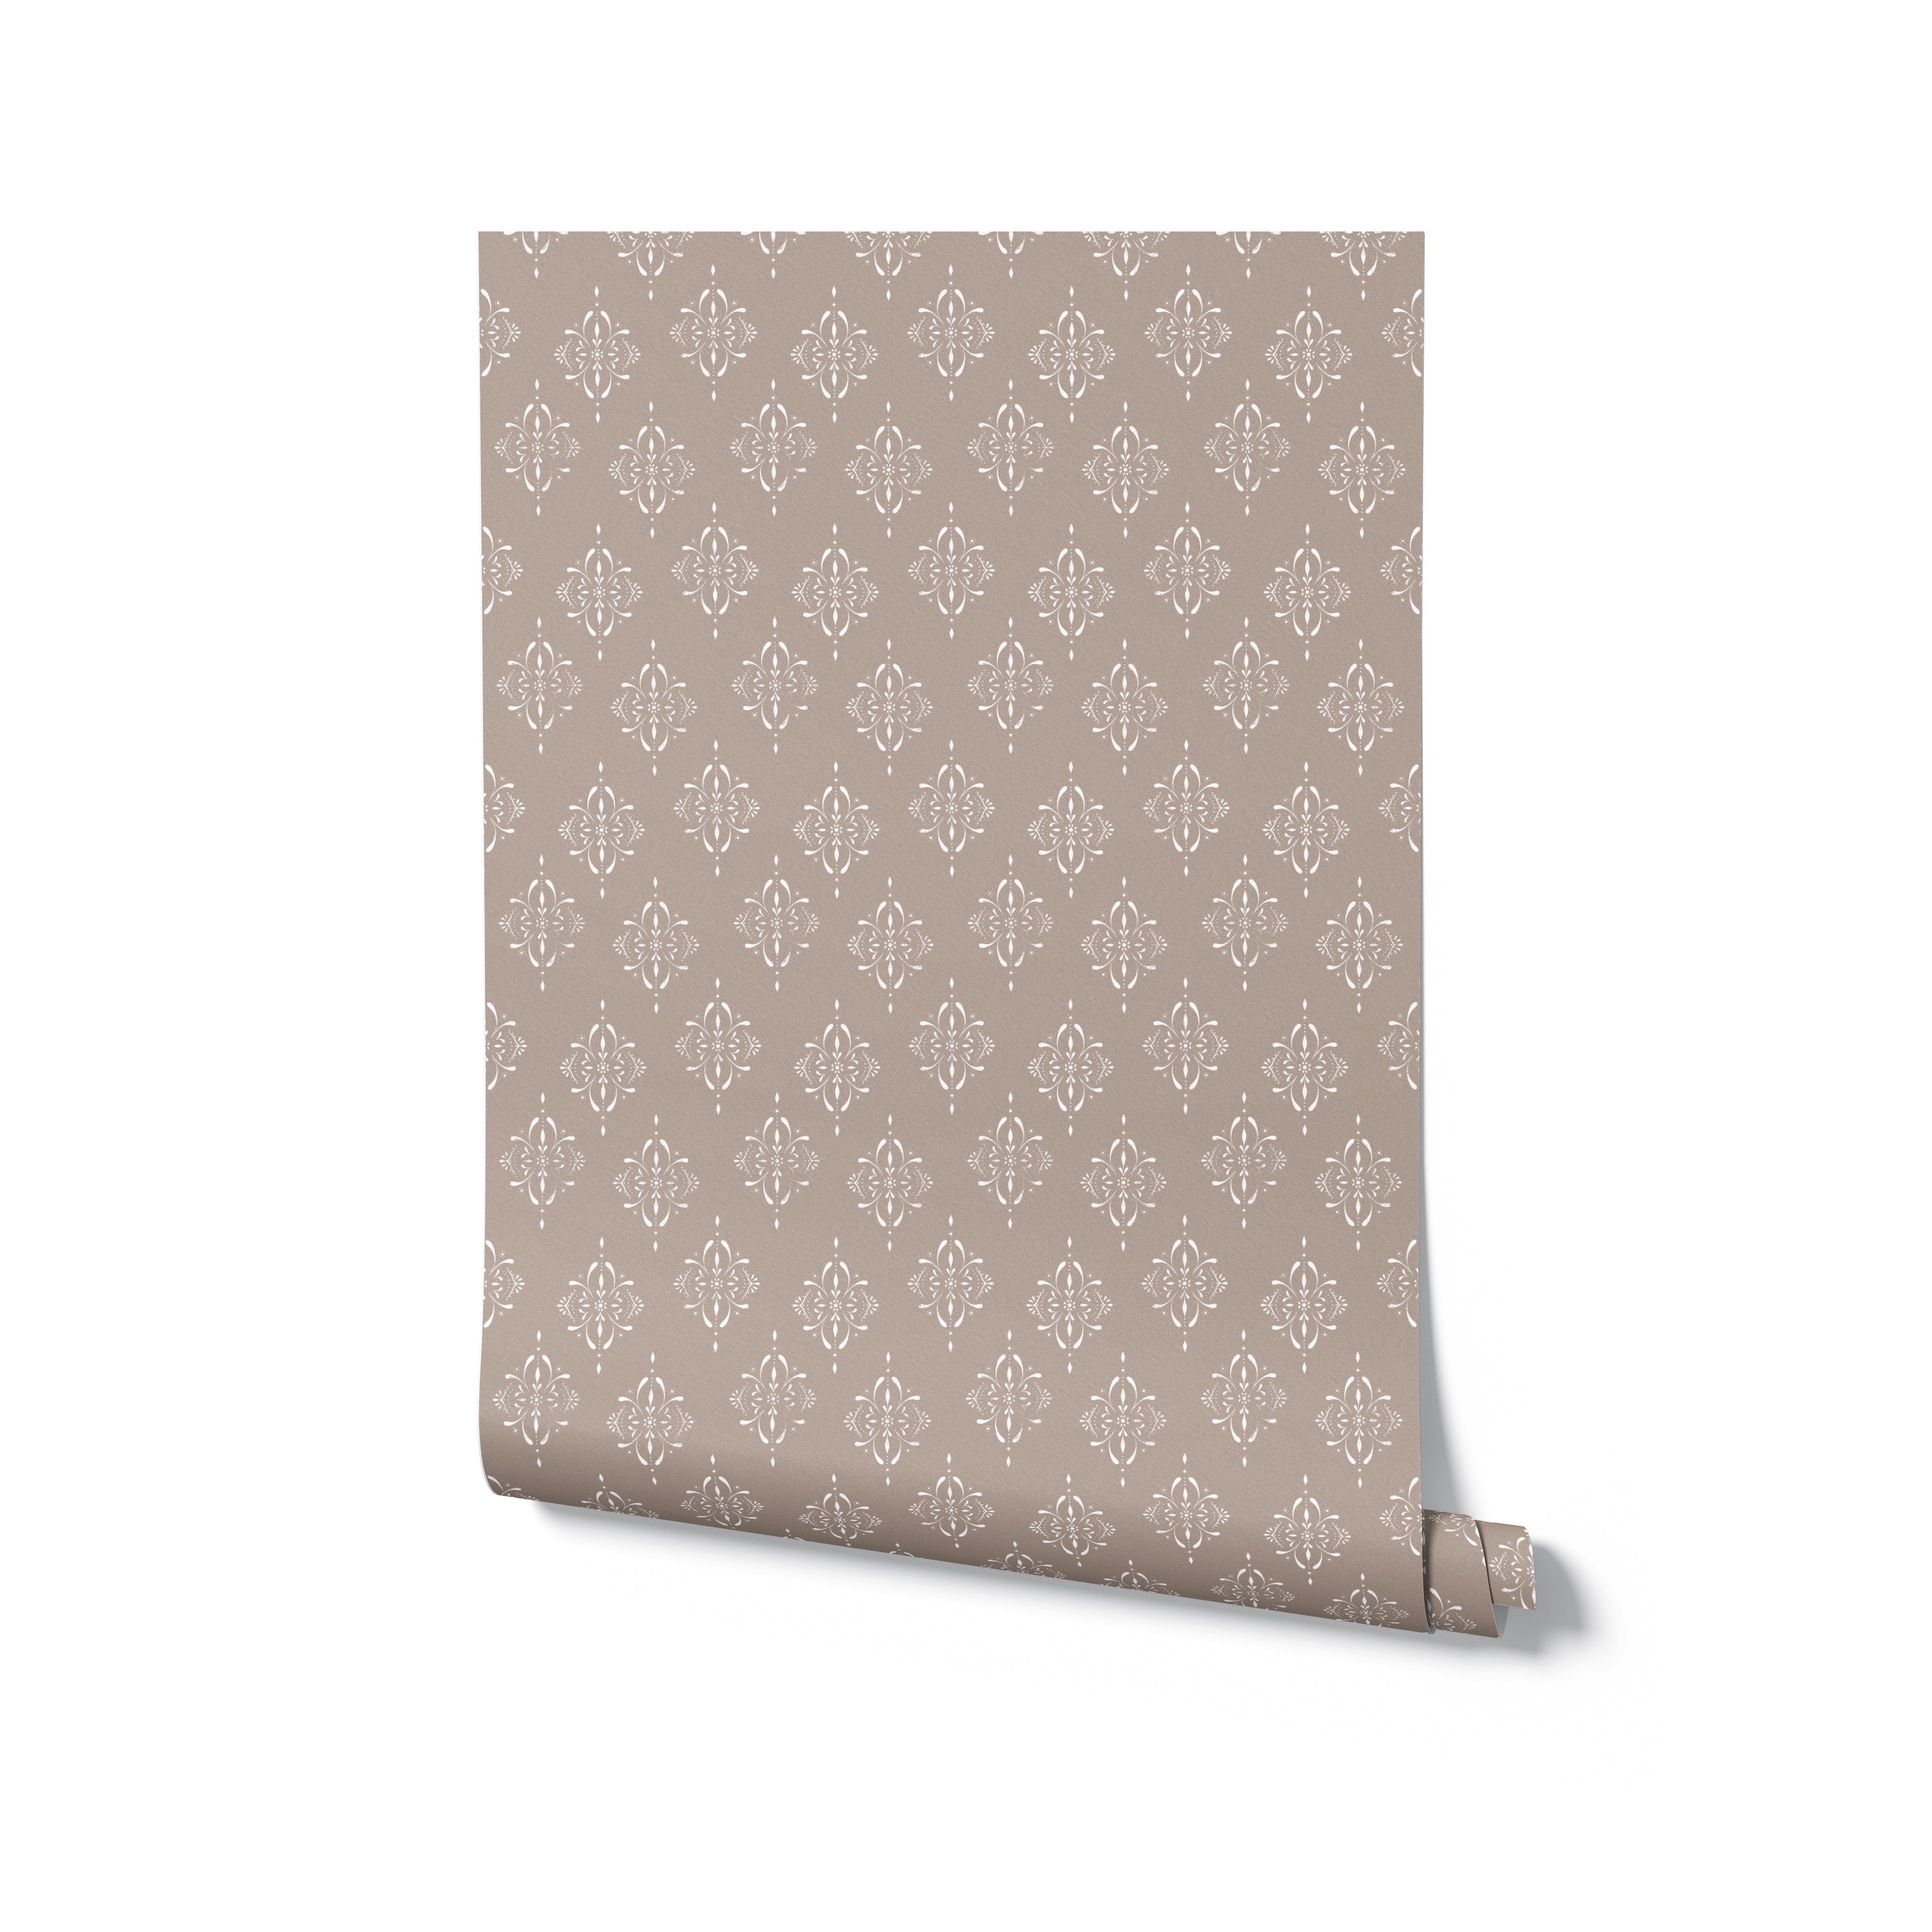 A flat lay view of a single roll of Rustic Elegance Wallpaper. The roll showcases the elegant floral pattern in white on a beige background, highlighting the detailed and symmetrical design.